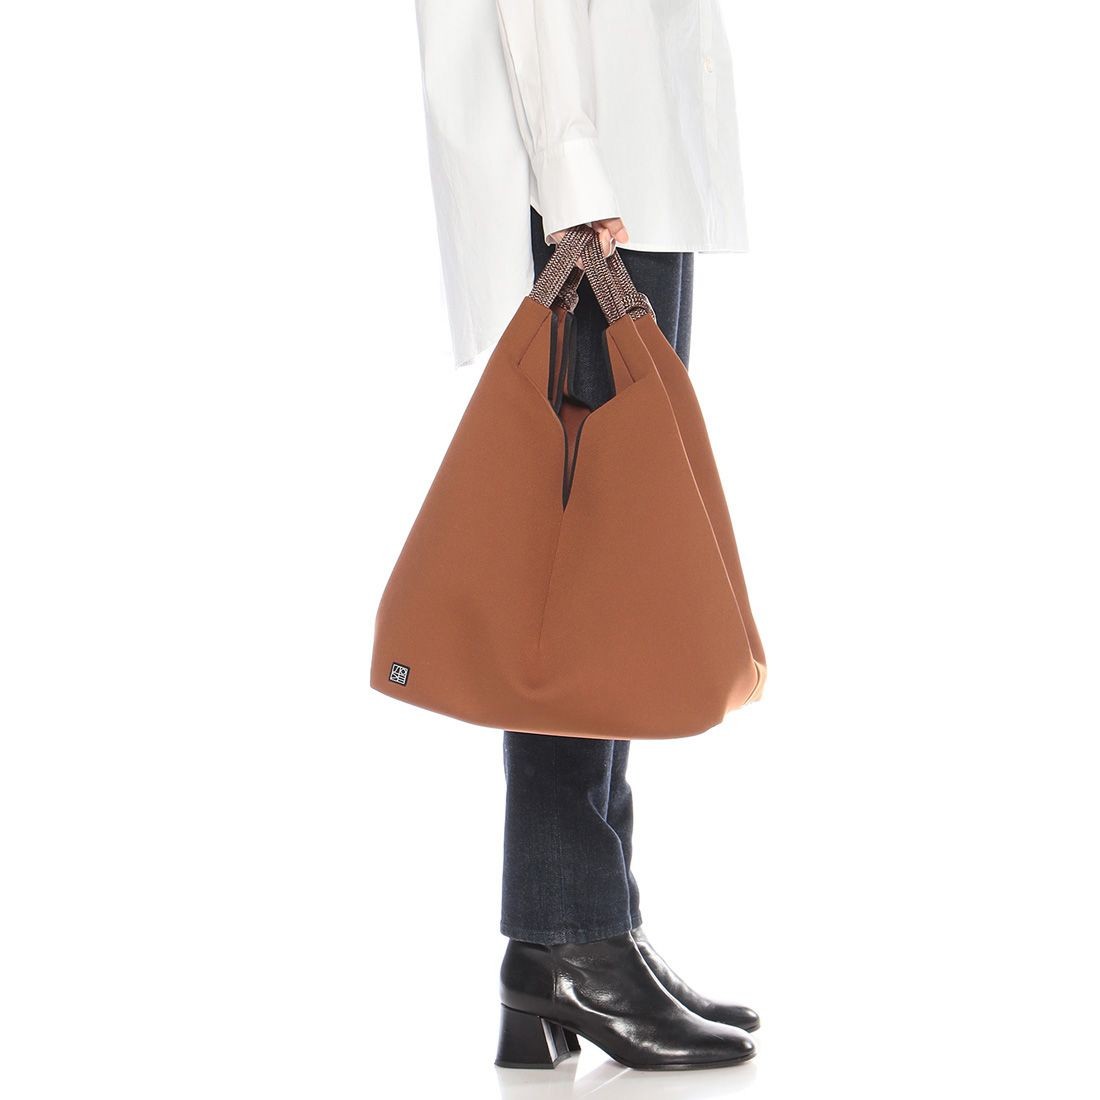 ”SOLSTICE TOTE” バッグ